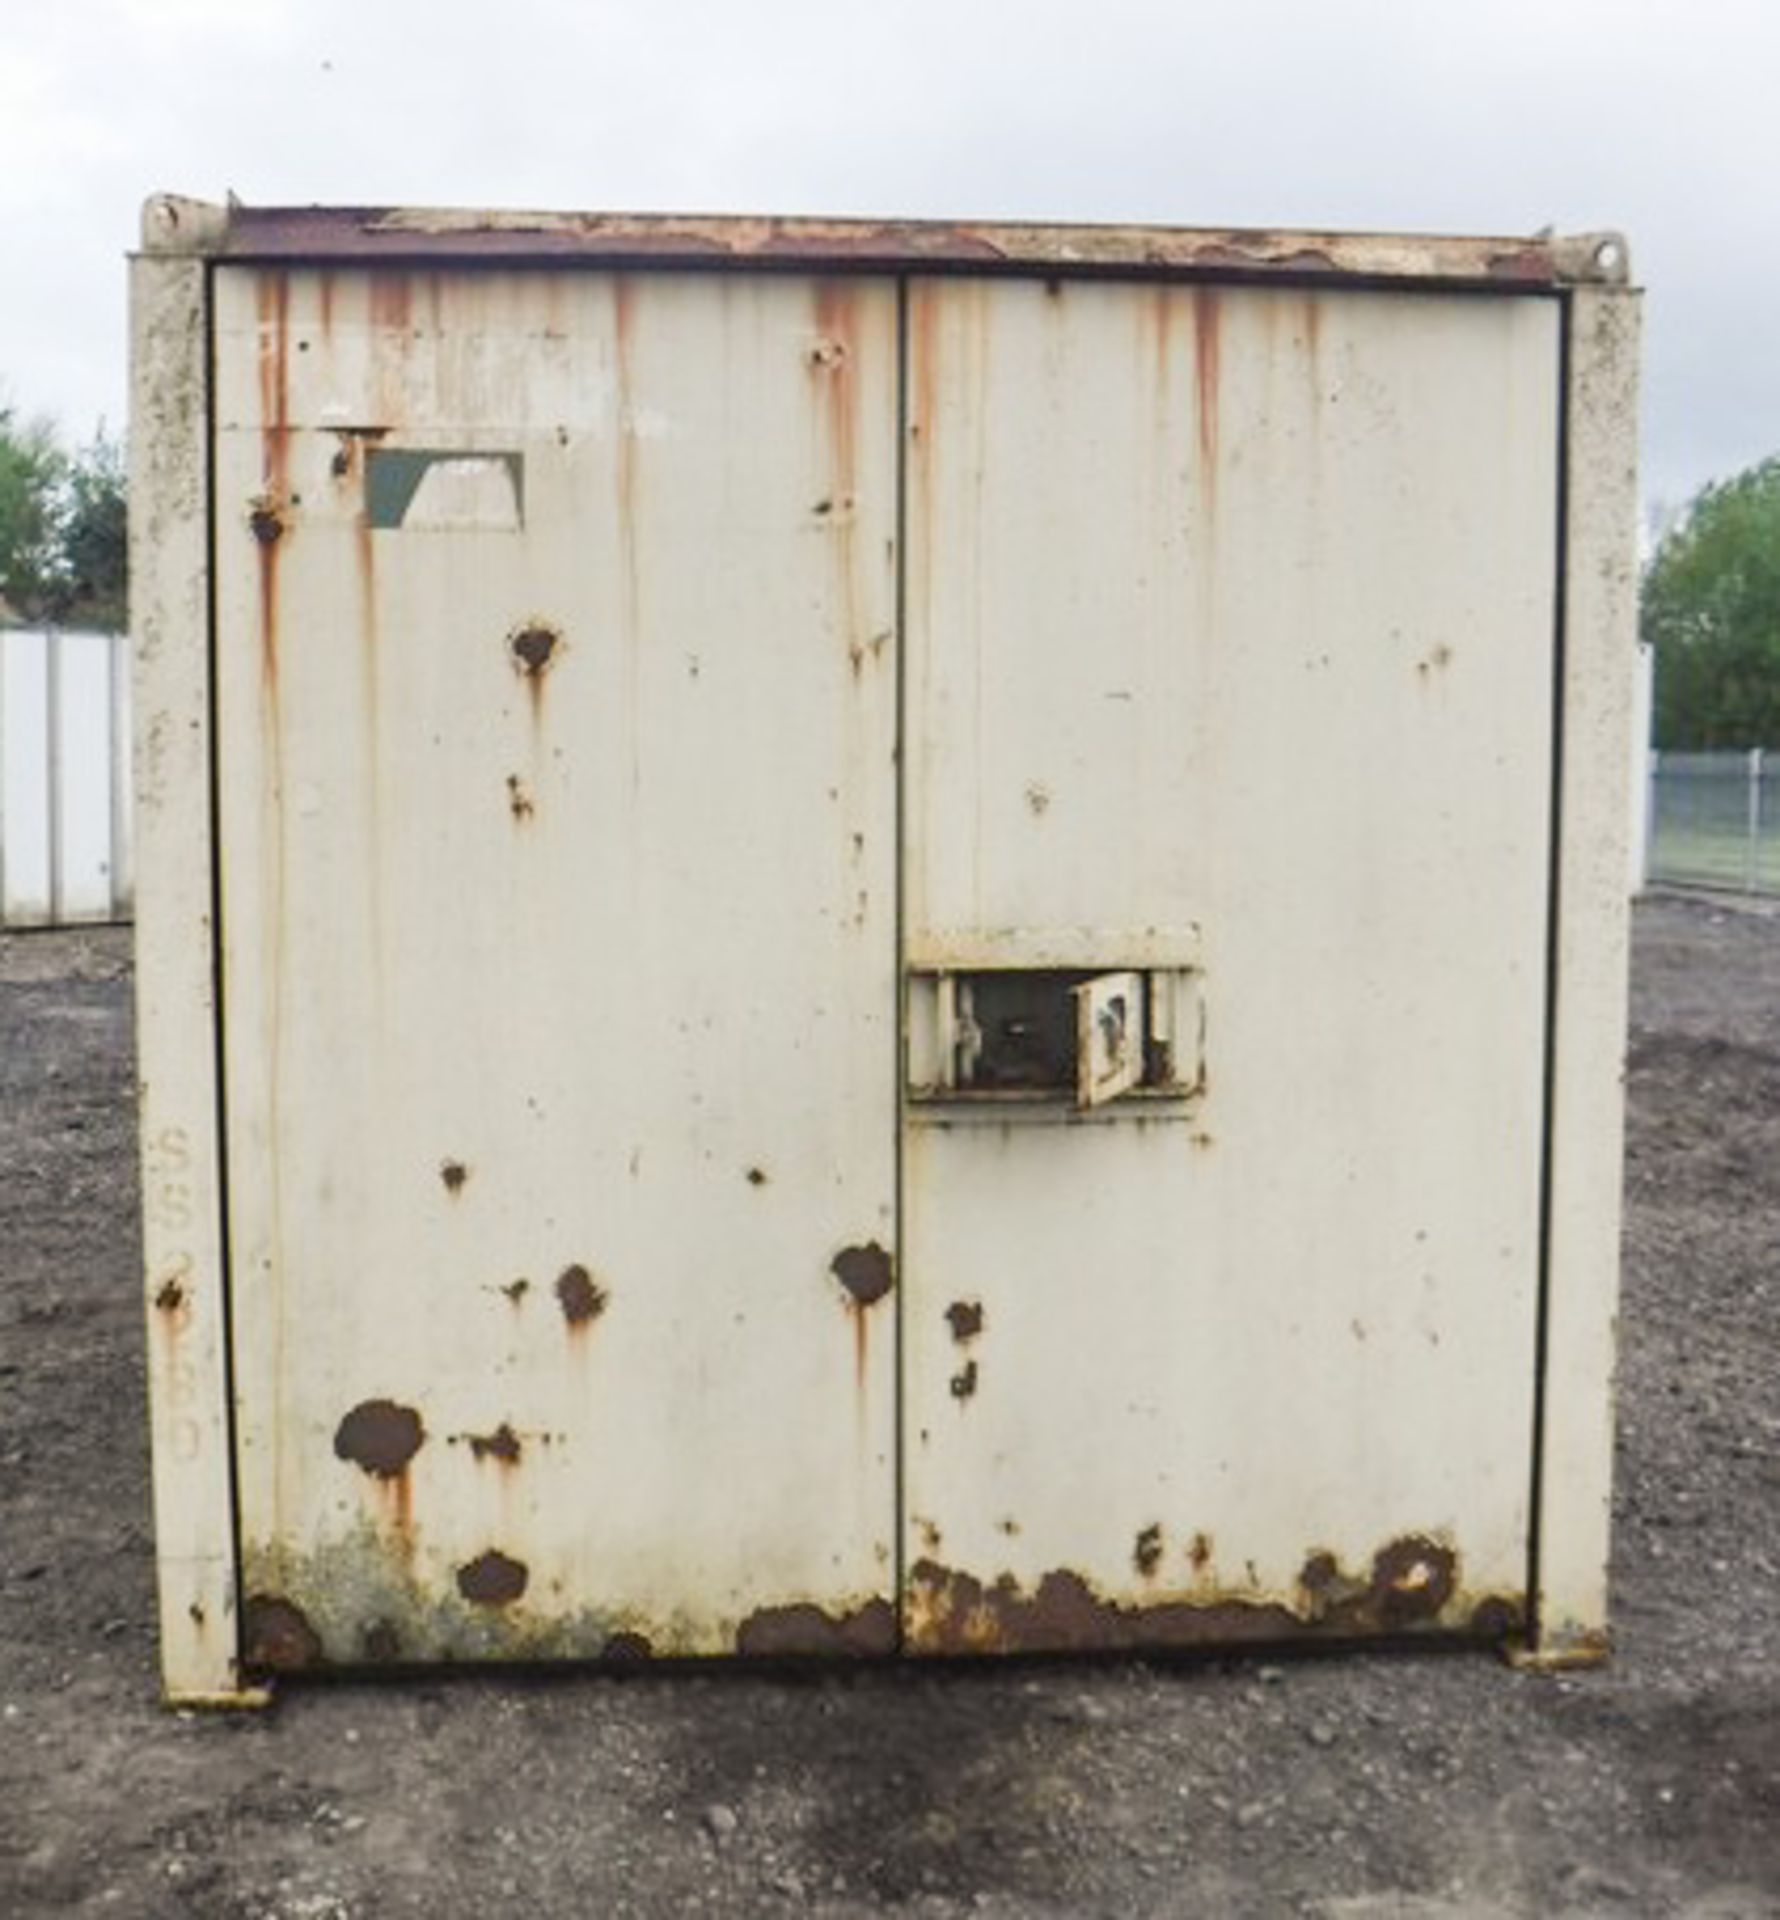 USED 20 X 8 STORAGE CONTAINER, LIFTING EYES, NO FORKLIFT POCKETS, NO KEY, S/N SS2280